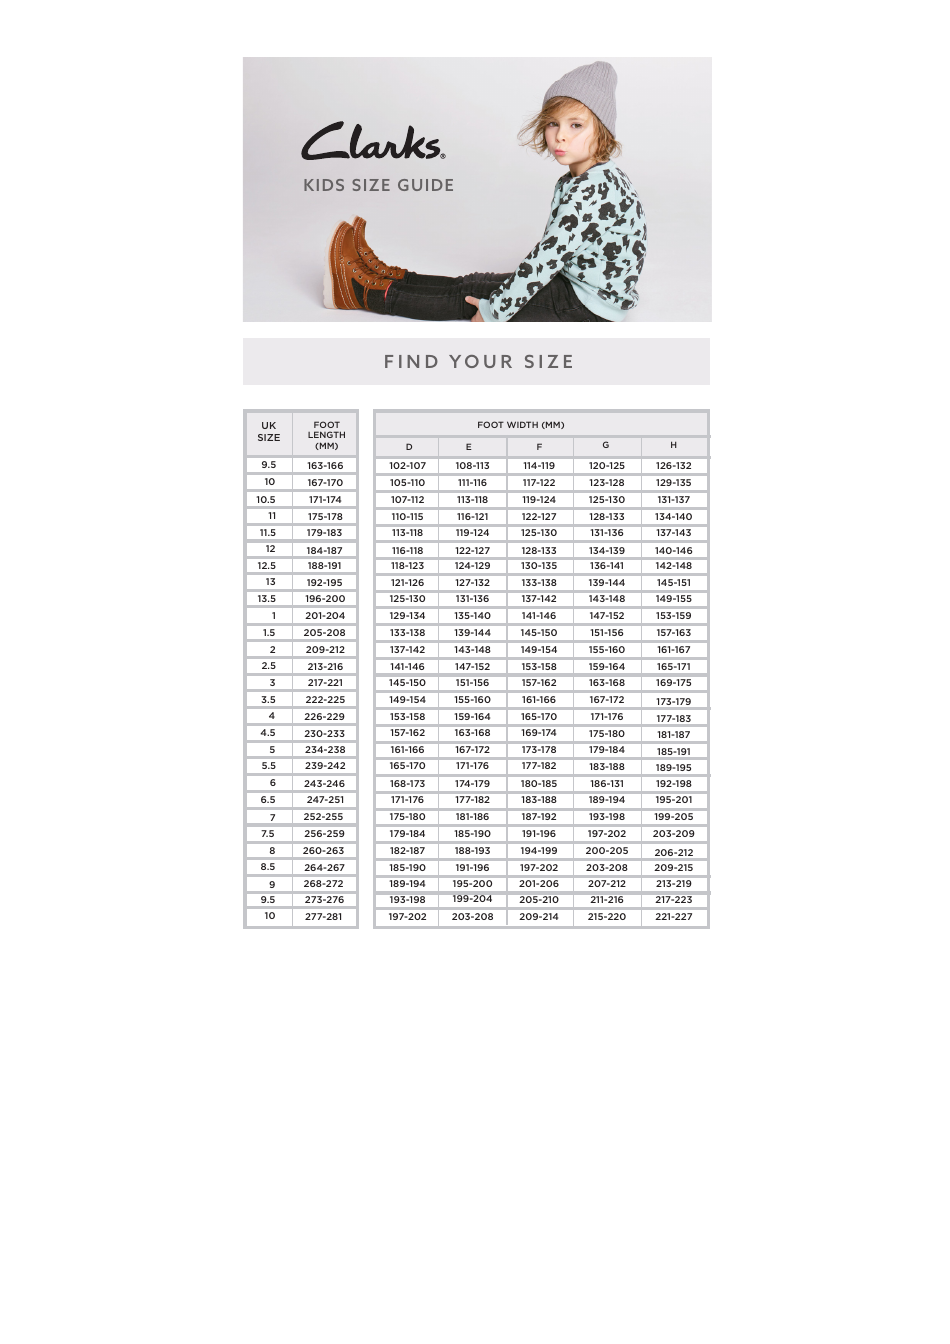 Childrens Shoe Size Chart - Clarks, Page 1